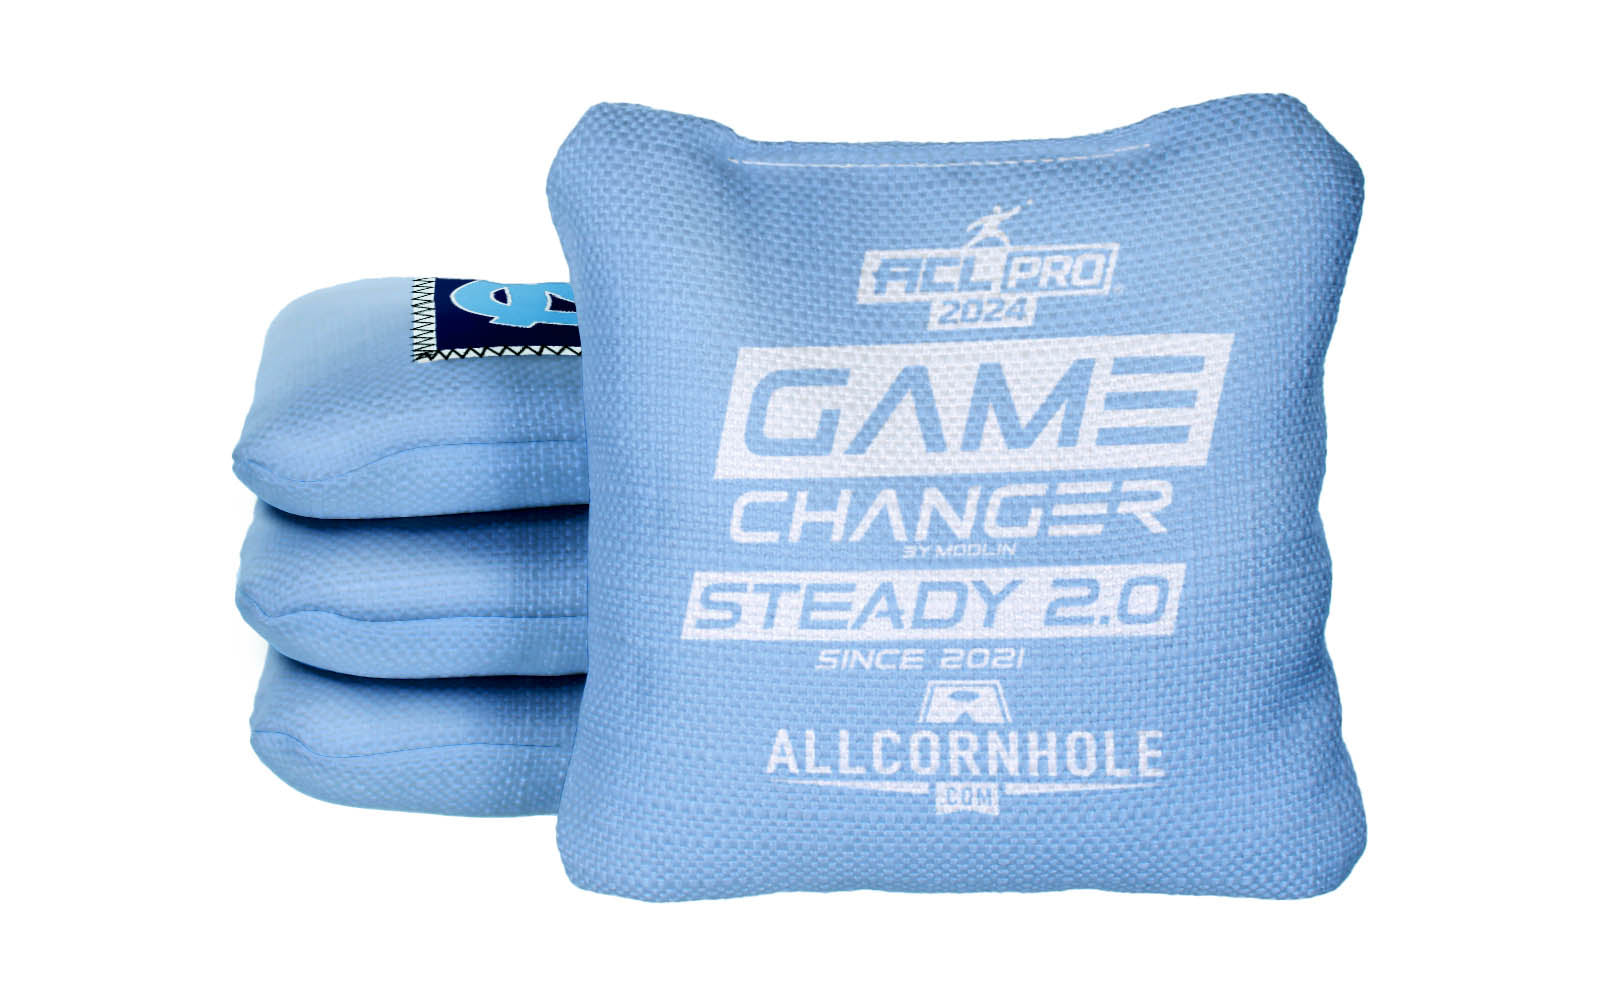 Officially Licensed Collegiate Cornhole Bags - AllCornhole Game Changers Steady 2.0 - Set of 4 - University of North Carolina